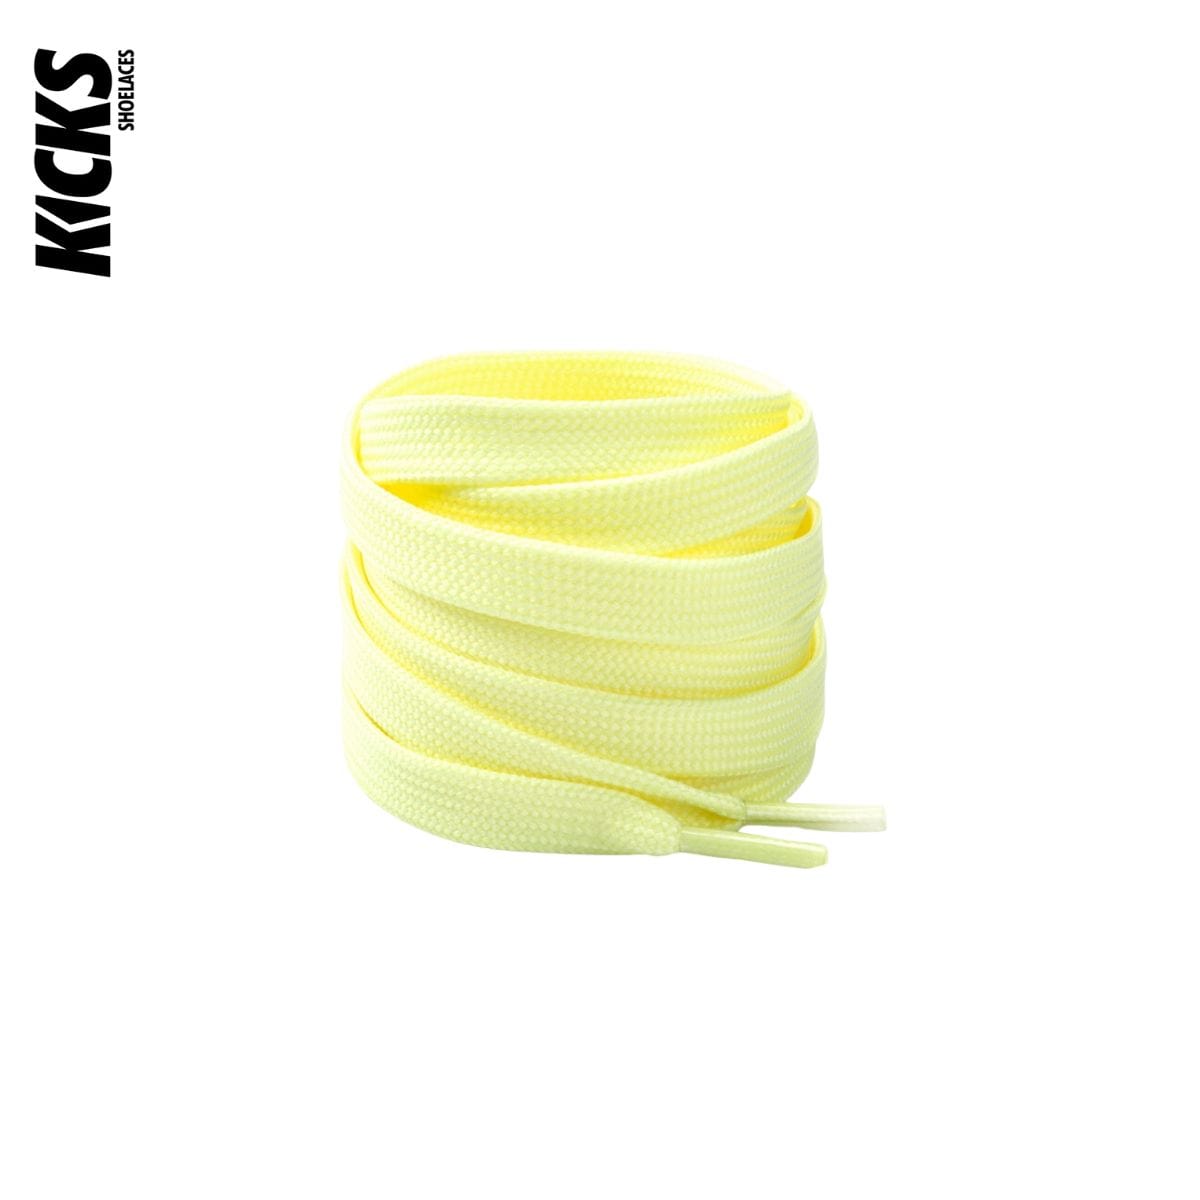 Adidas NMD Shoelace Replacements - Kicks Shoelaces